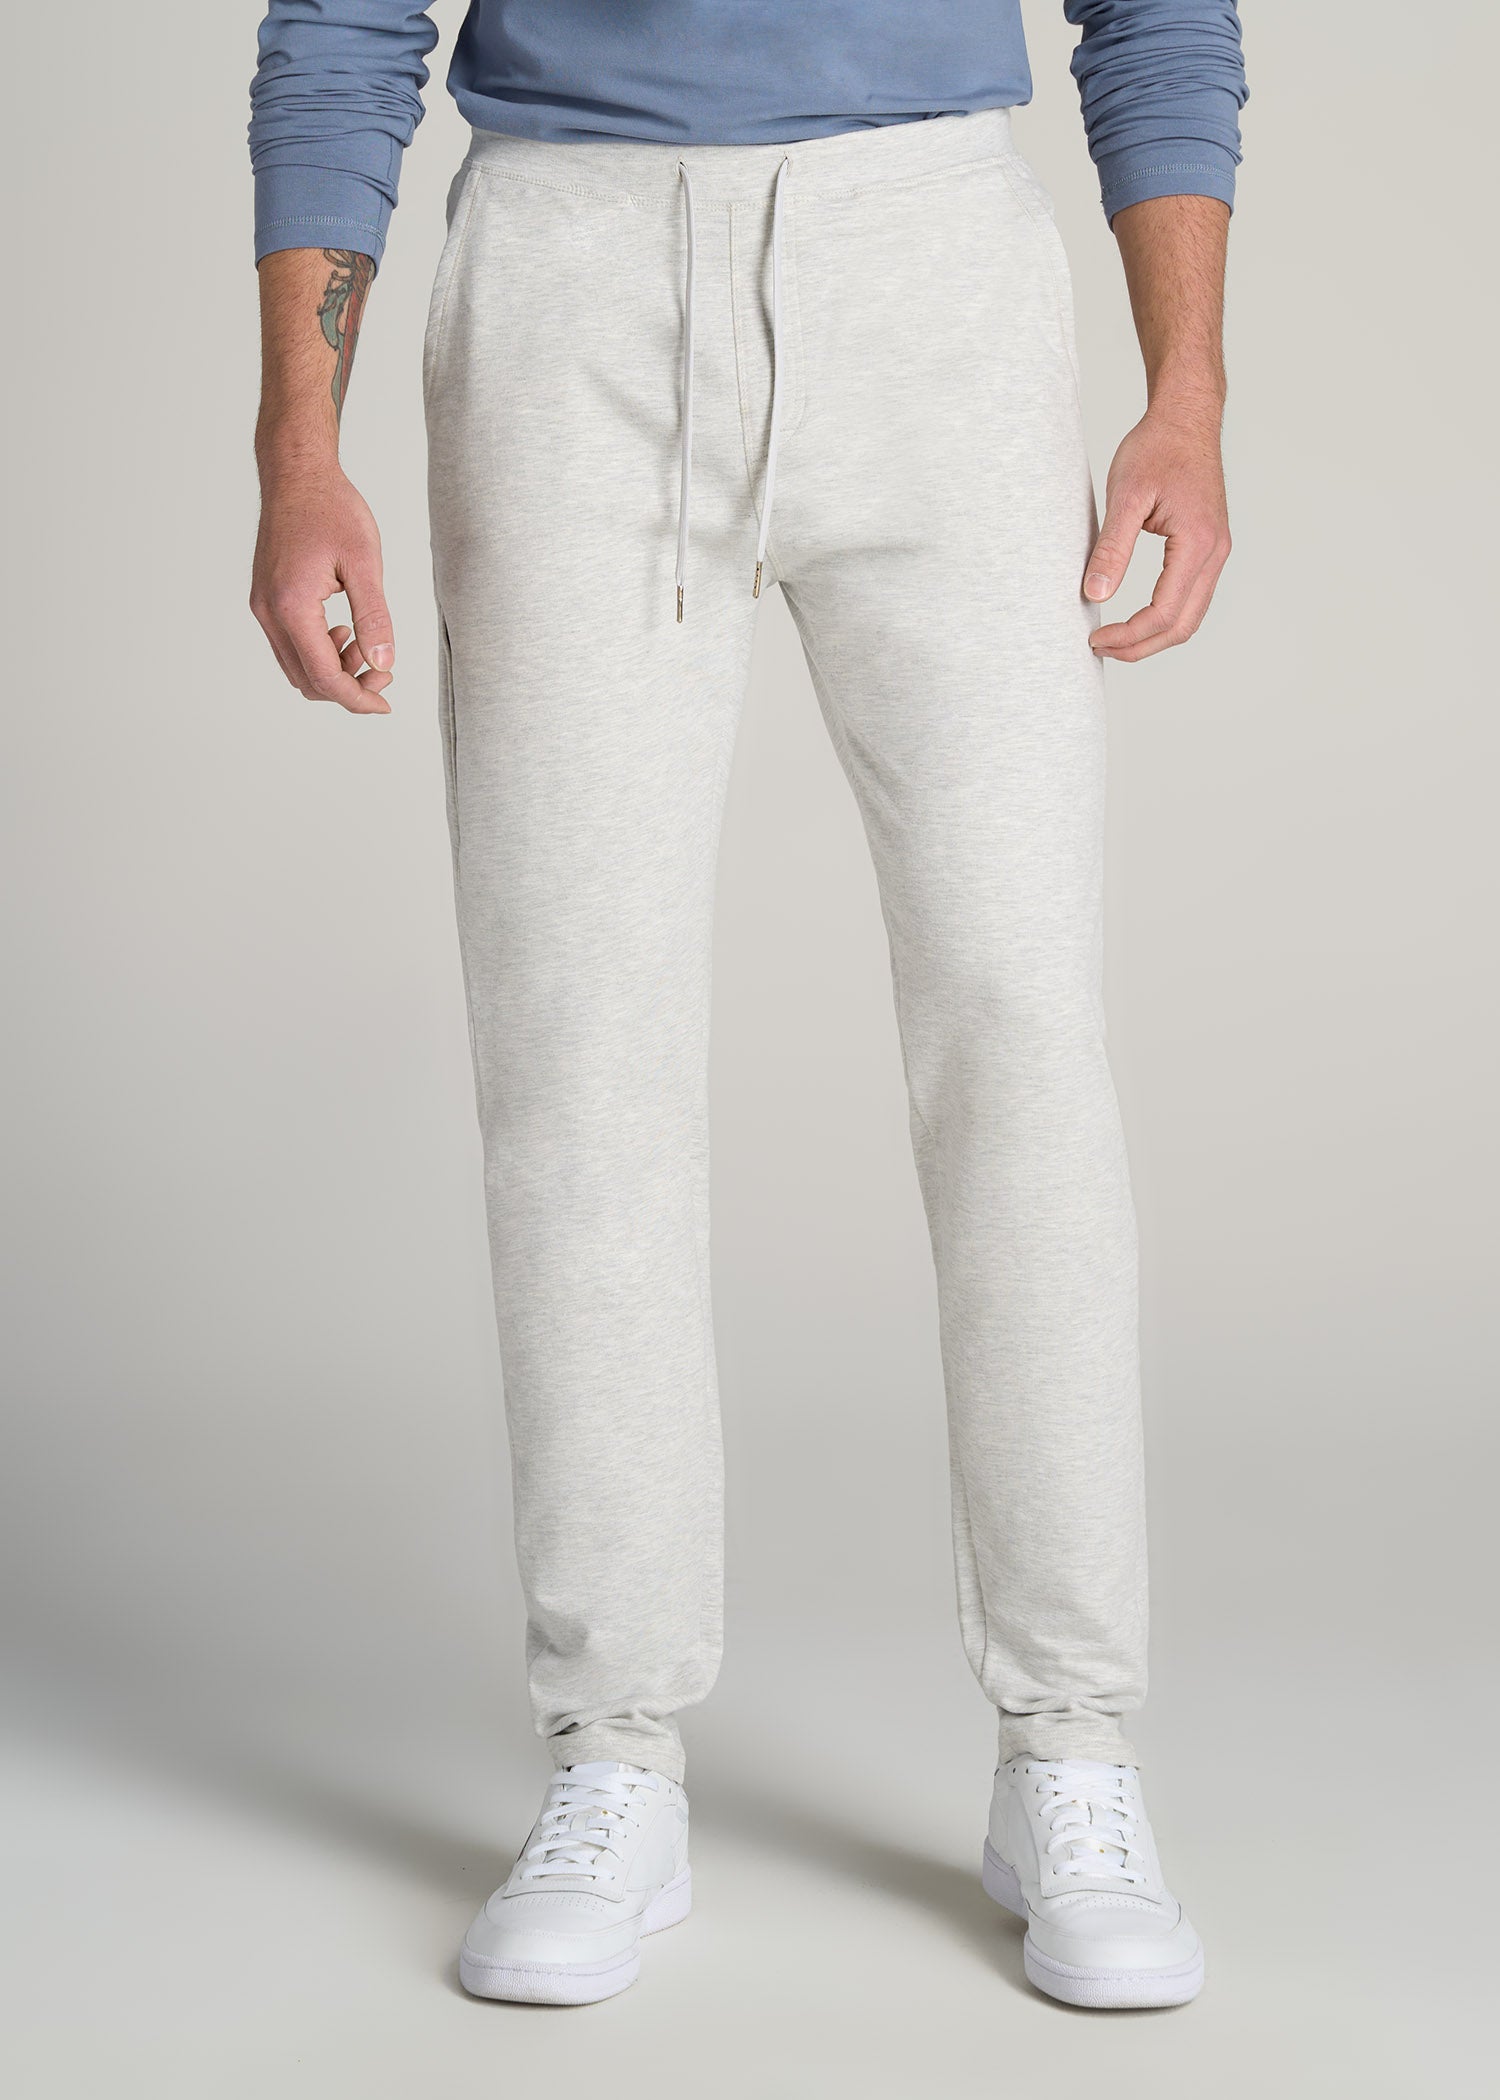    American-Tall-Men-Microsanded-French-Terry-Sweatpant-Grey-Mix-front